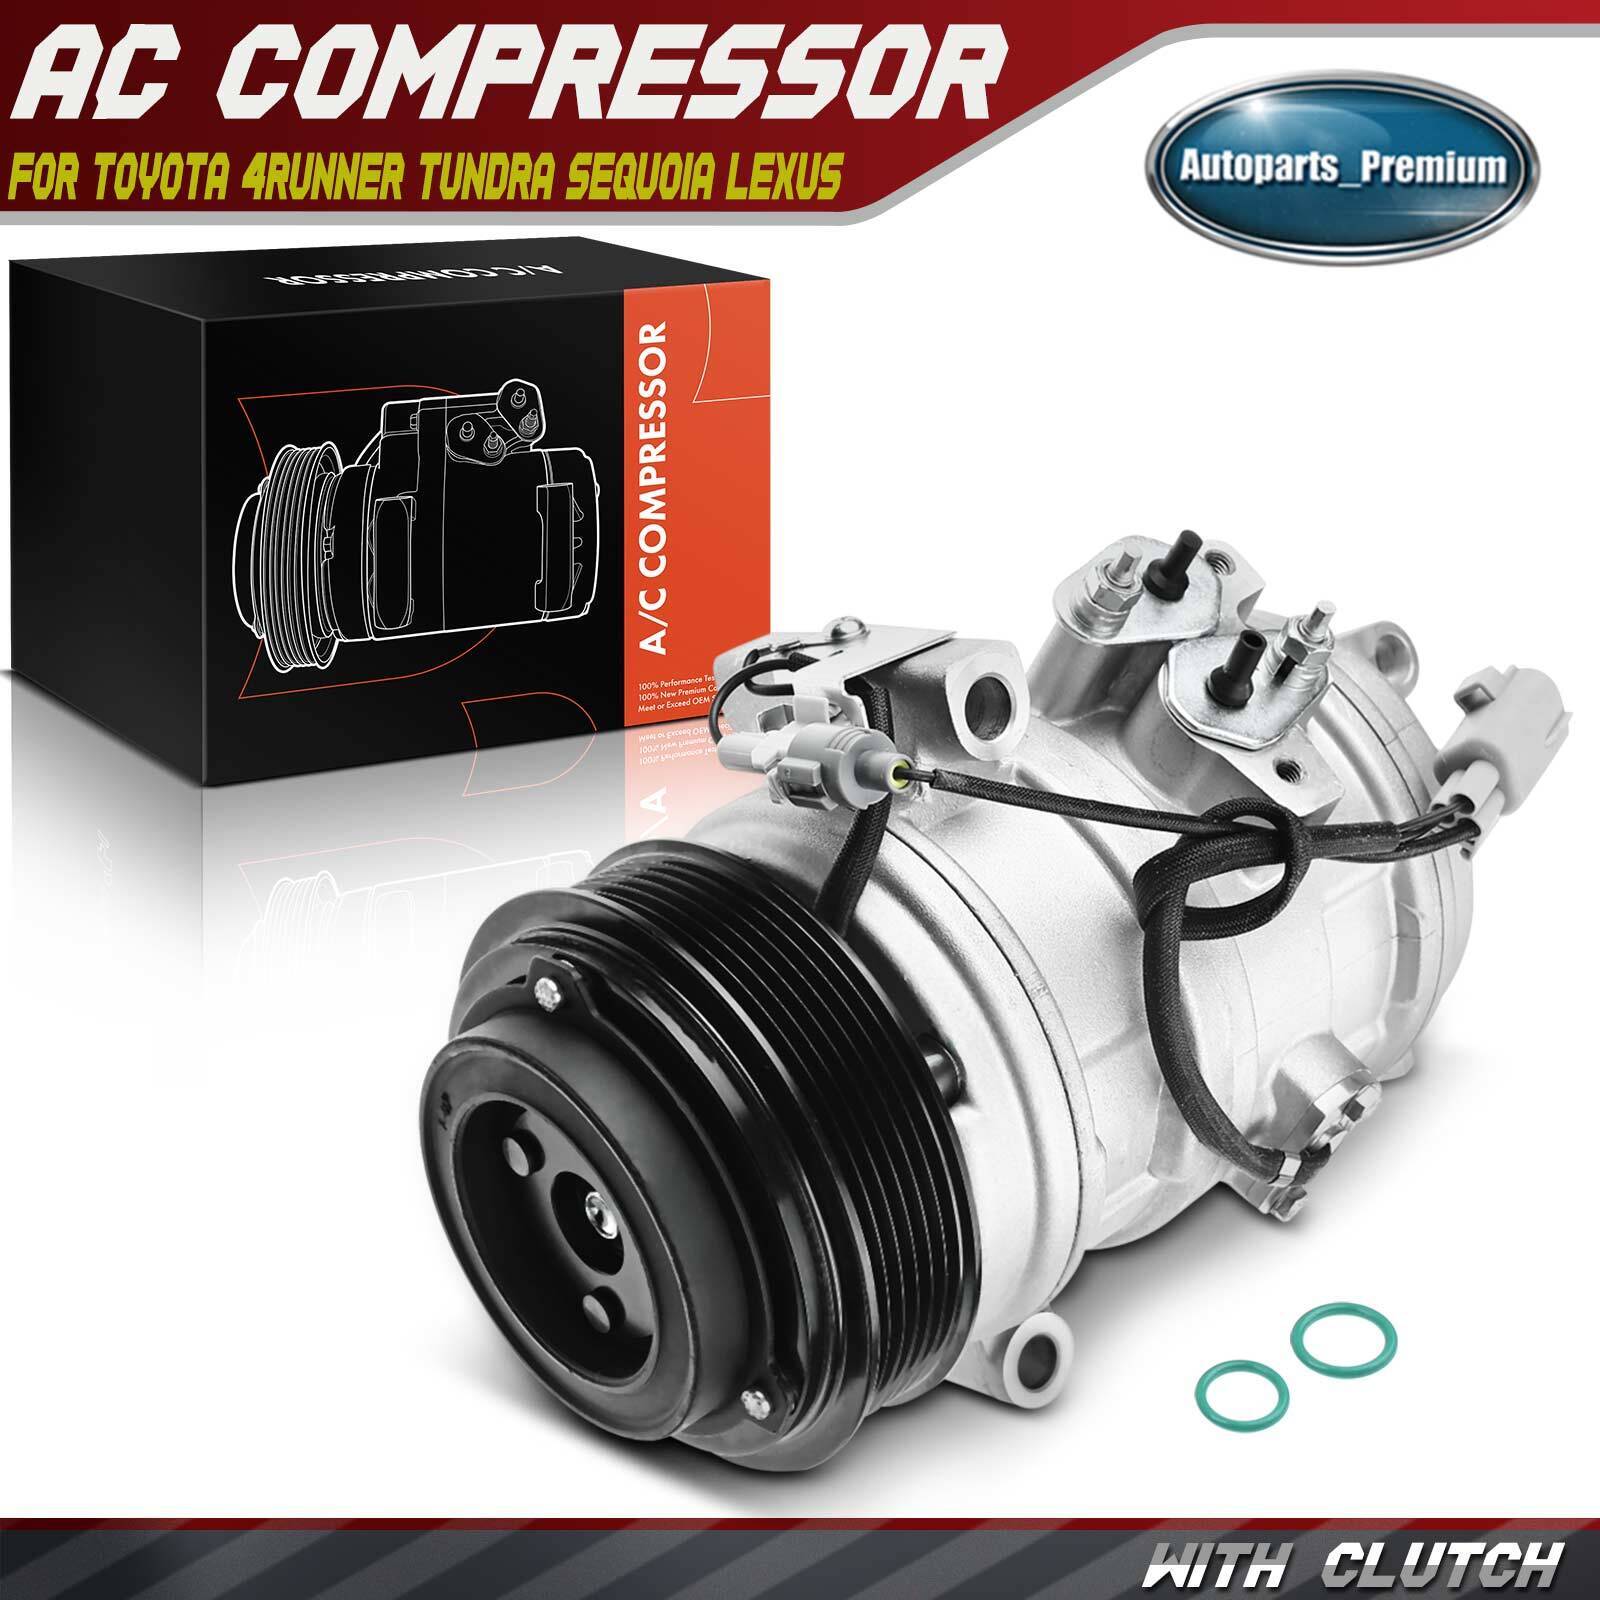 AC A/C Compressor with Clutch for Toyota 4Runner 03-09 Tundra Sequoia GX470 4.7L